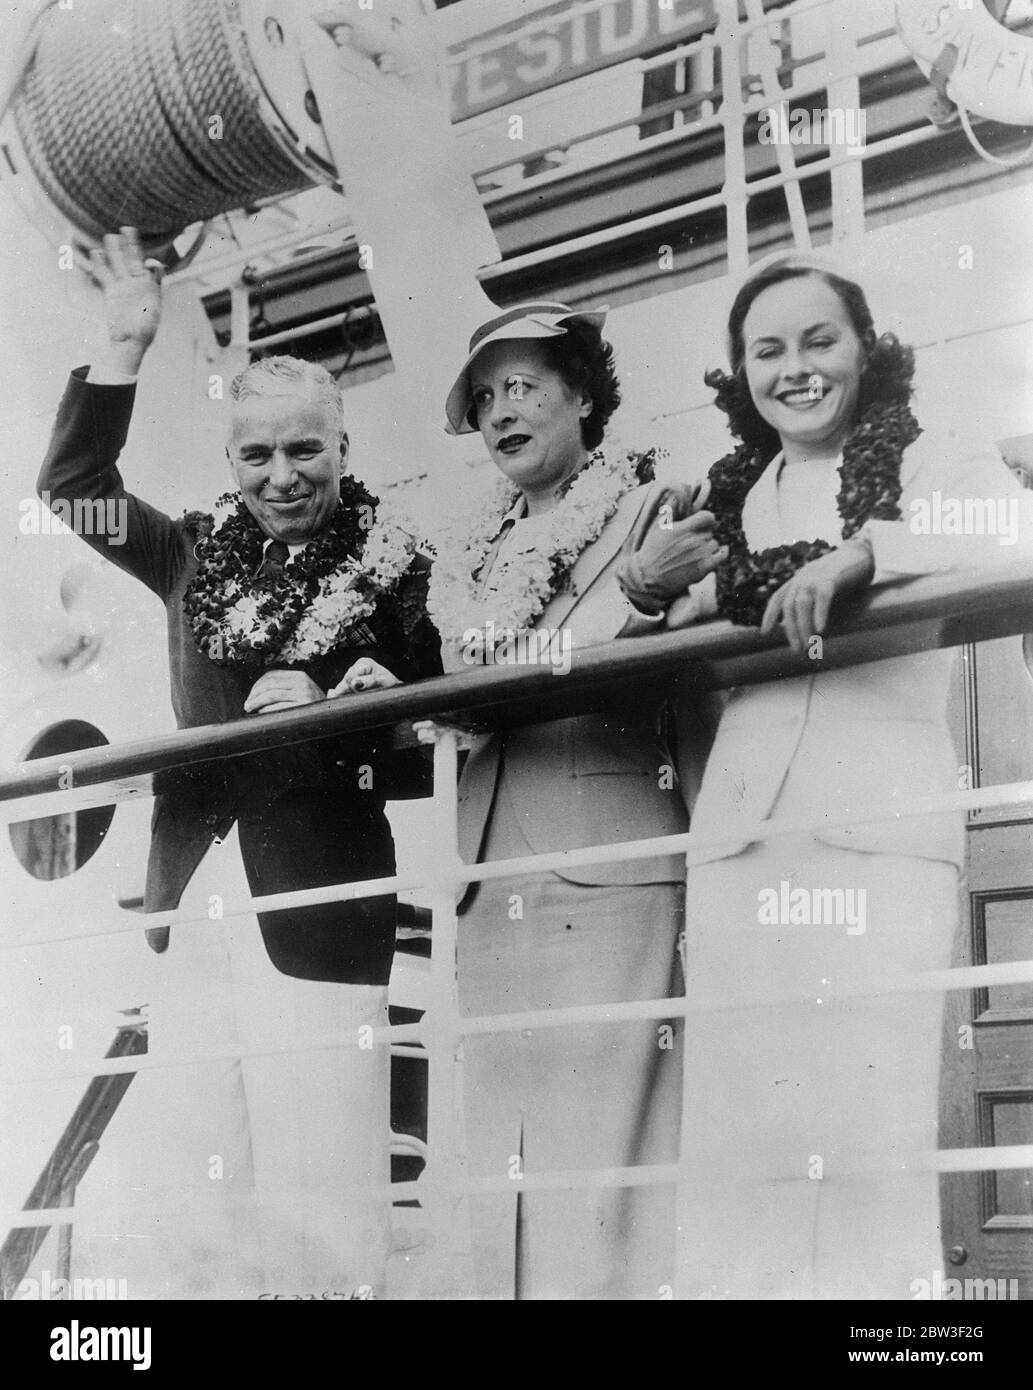 Charles Chaplin , now engaged to Paulette Goddard , lunches with Bernard Show in Honolulu . Charles Chaplin , famous film comedian , who is now rported definitely engaged to Paulette Goddard , his leading Lady in in ' Moddern Times ' , lunched with Mr George Bernard Shaw in Honolulu where Chaplin made a stay with his fiancee and her mother , Mrs Alta Goddard , during their holiday tour . It is stated that Chaplin kept GBS waiting for 35 minutes in front of the Royal Royal Hawaiian Hotel and that Mr Shaw sputtered and fumed with rage ! Photo shows , Charles Chaplin , Paulette Goddard ( right ) Stock Photo